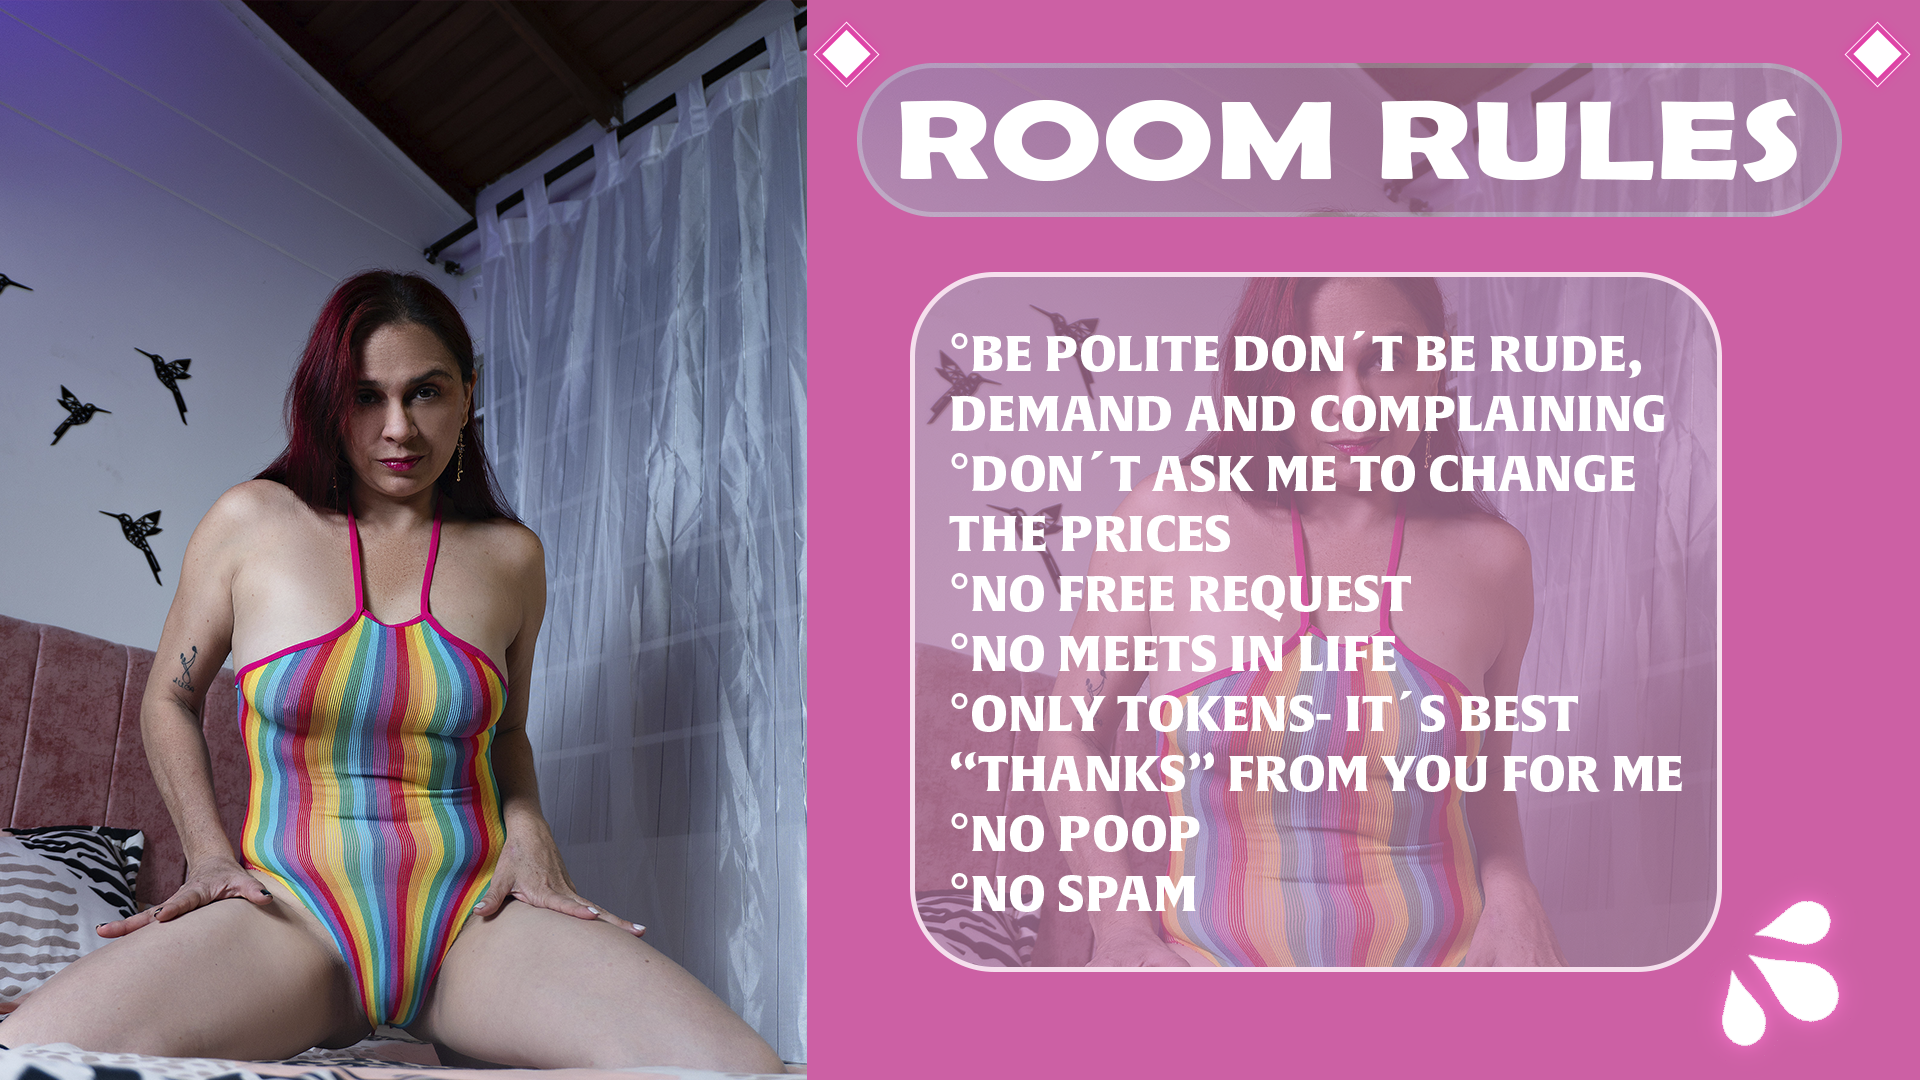 Lilith-collins room rules image: 1